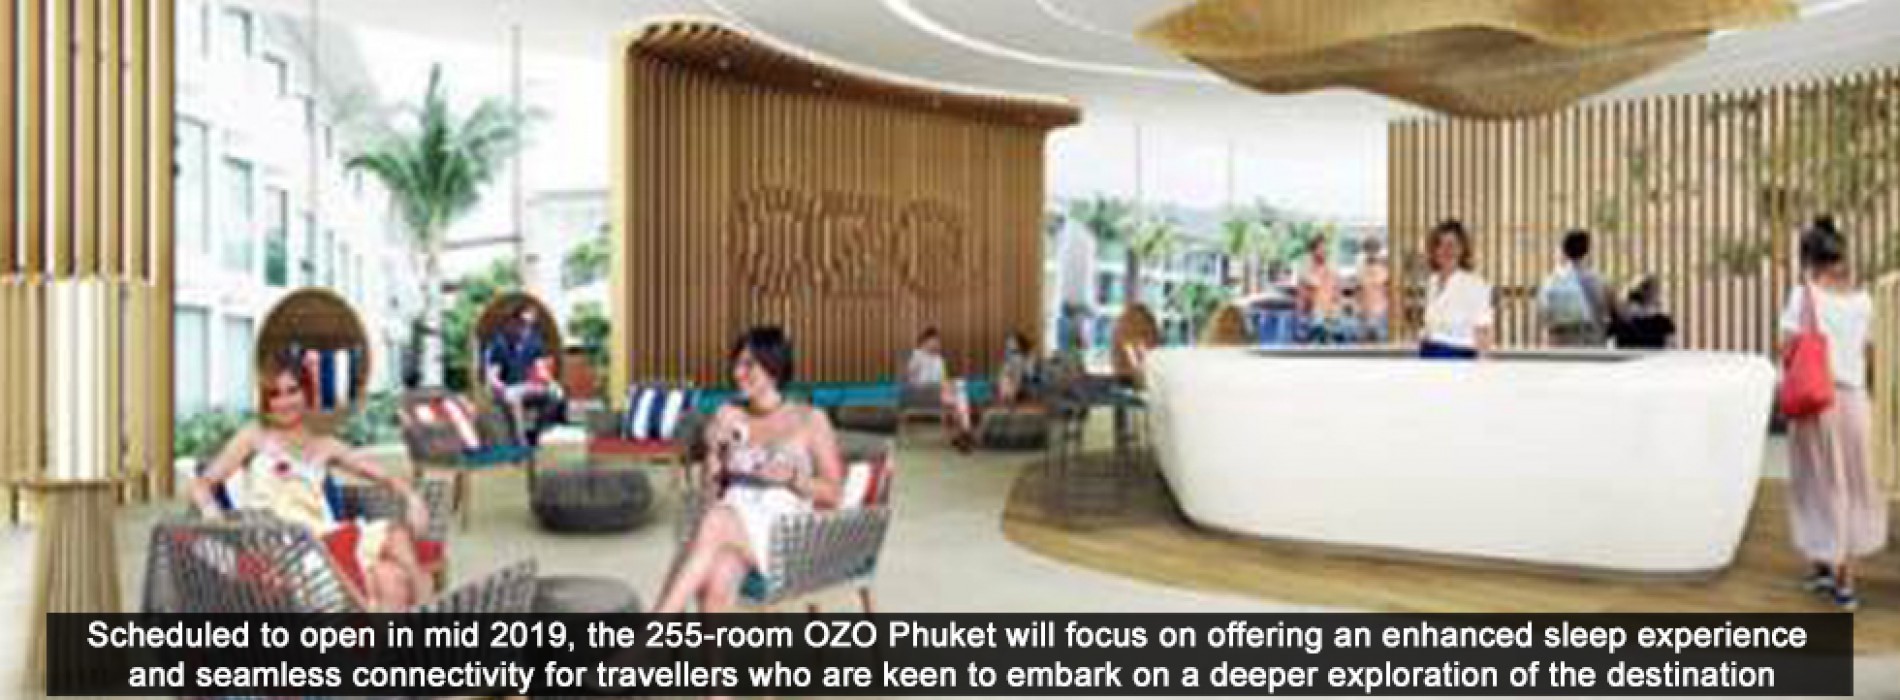 ONYX Hospitality Group expands its OZO presence with a new hotel in Phuket’s Kata Beach